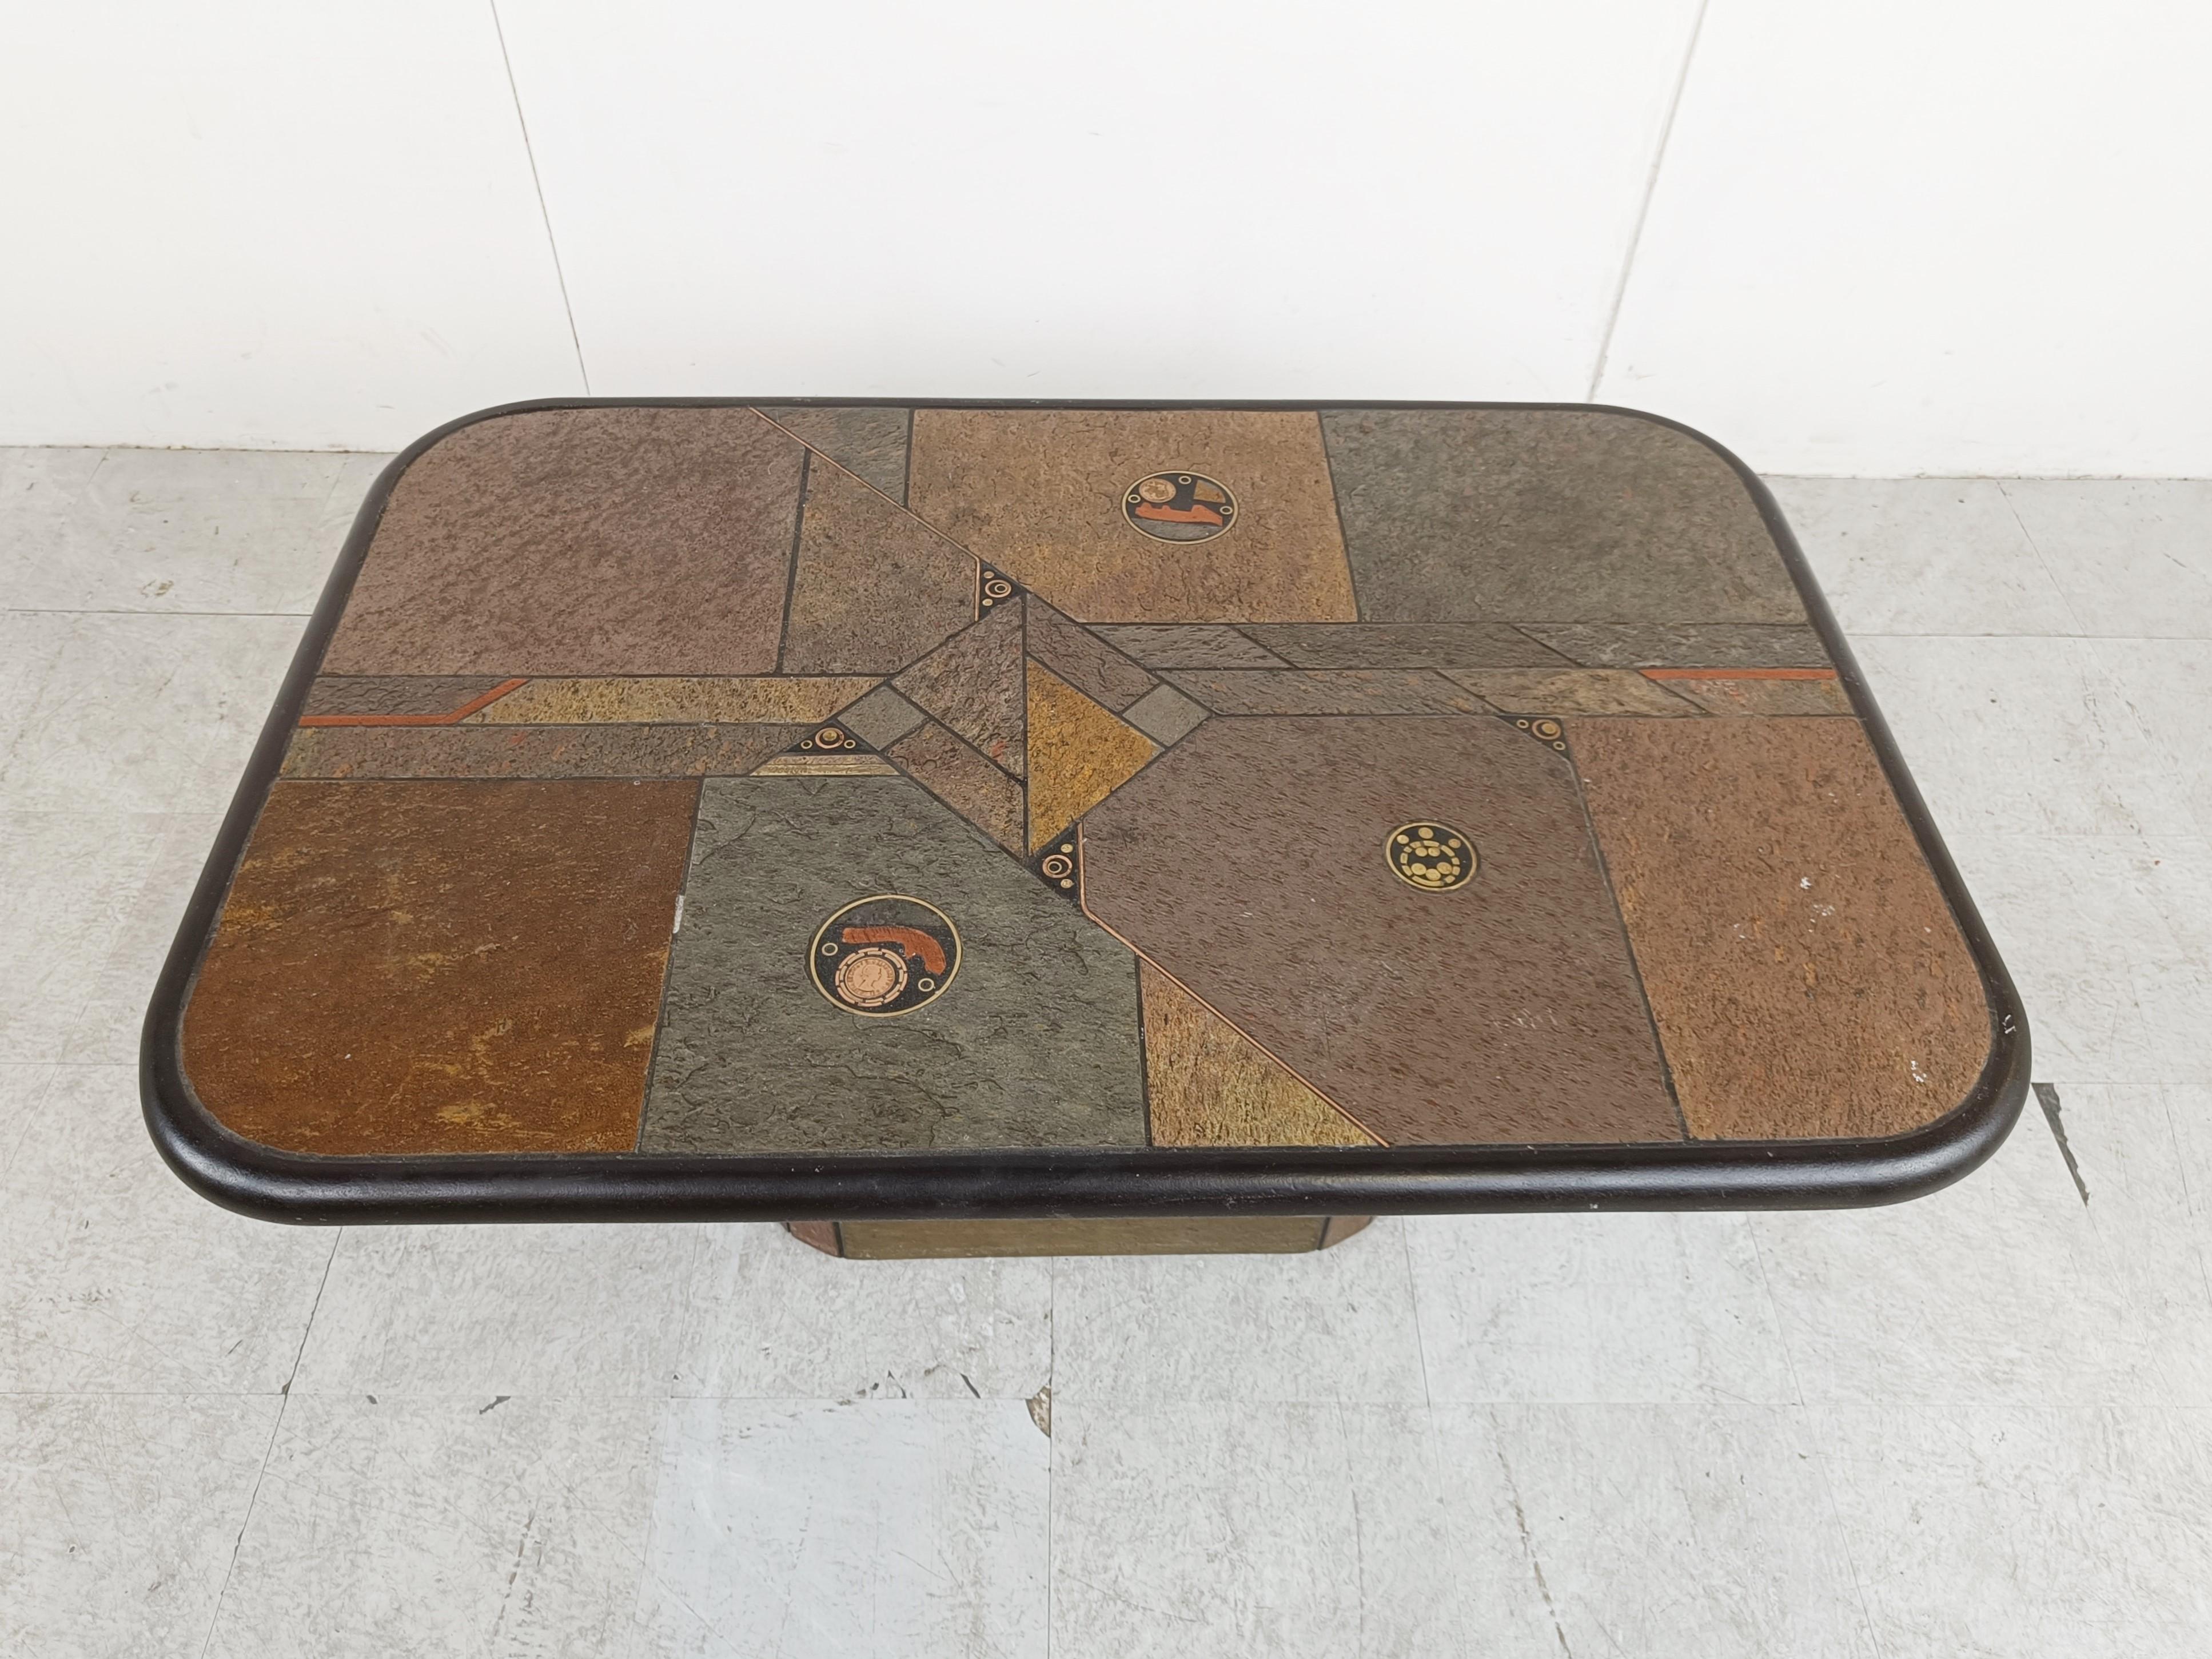 Brutalist slate and natural stone top coffee table with inlaid copper and brass.

The table is signed.

Good condition.

Very much in the style of Paul Kingma.

the table has little casters under the base to move around easily.

1980s -